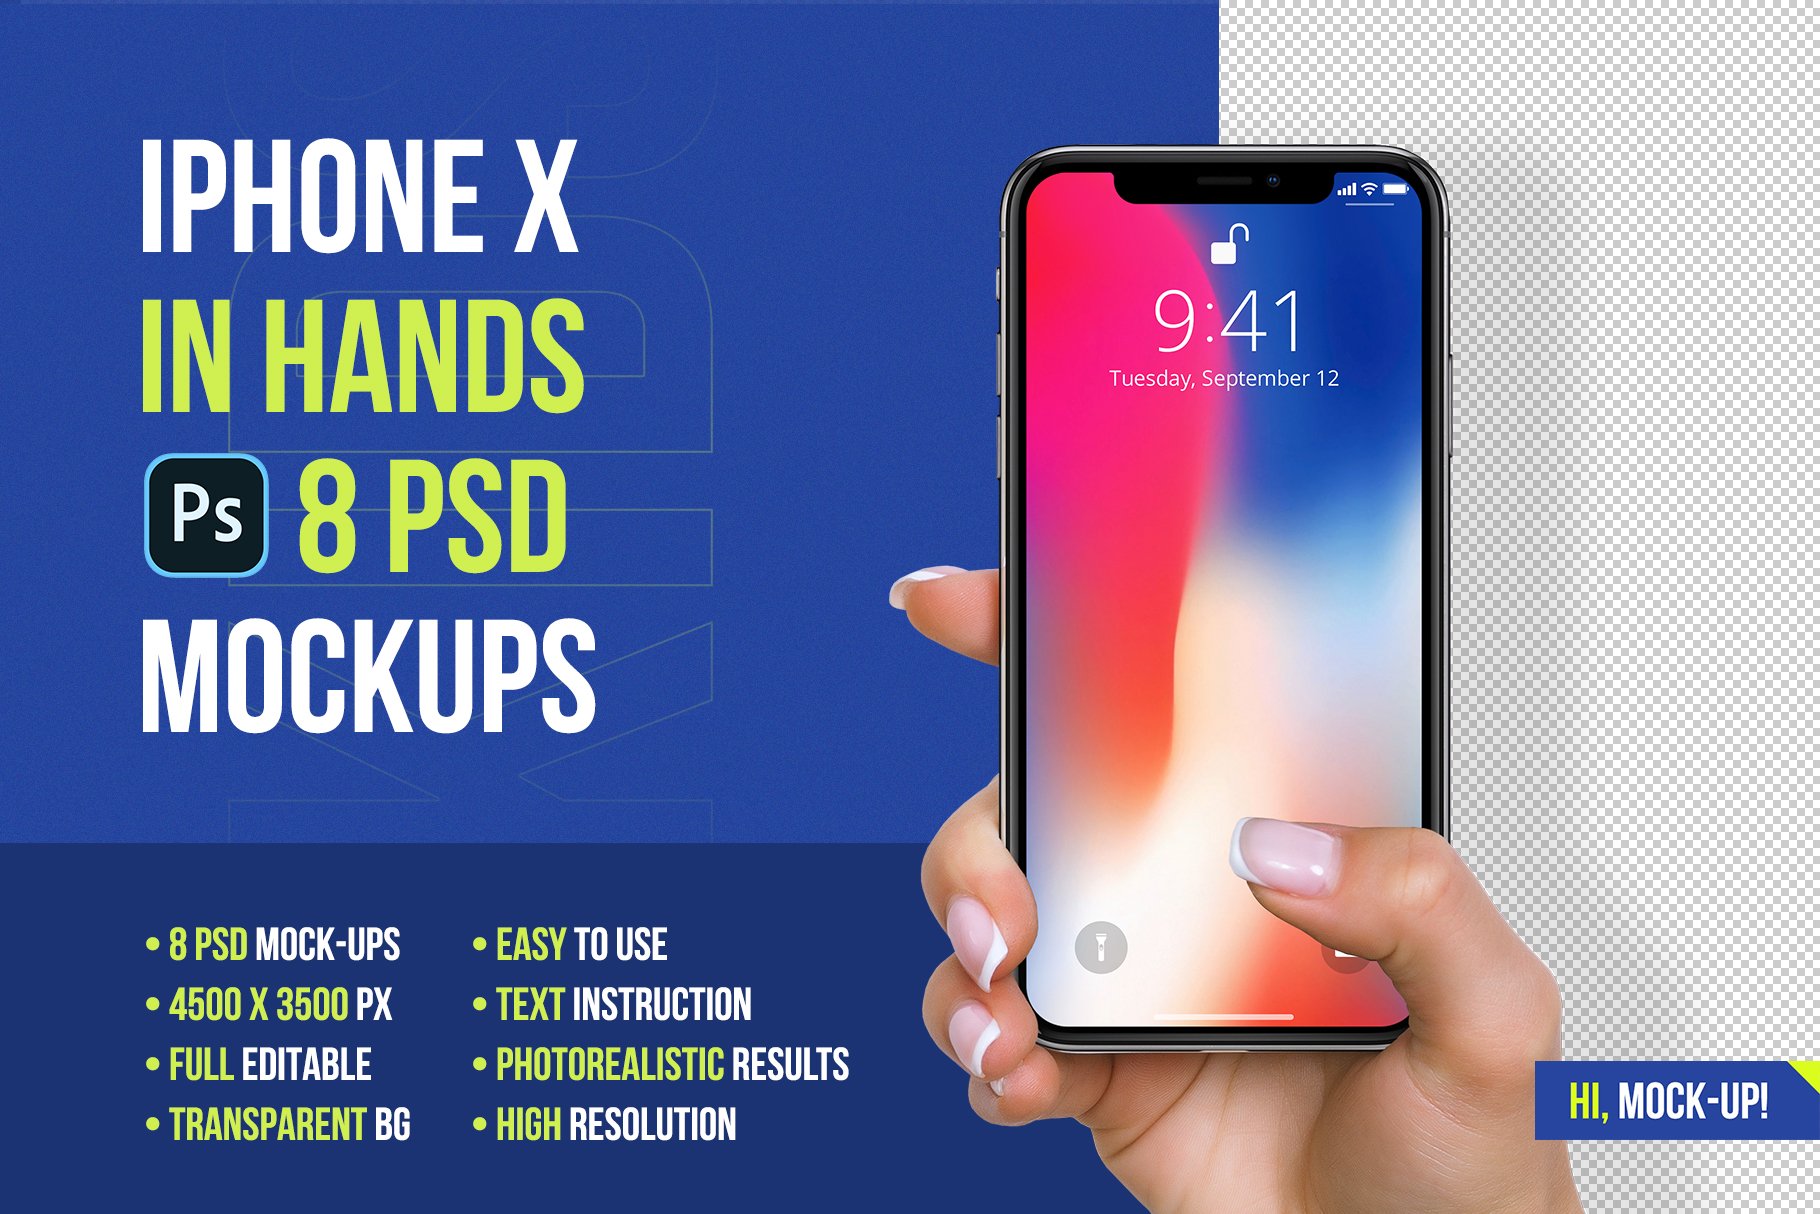 iPhone X in Hands Mockups cover image.